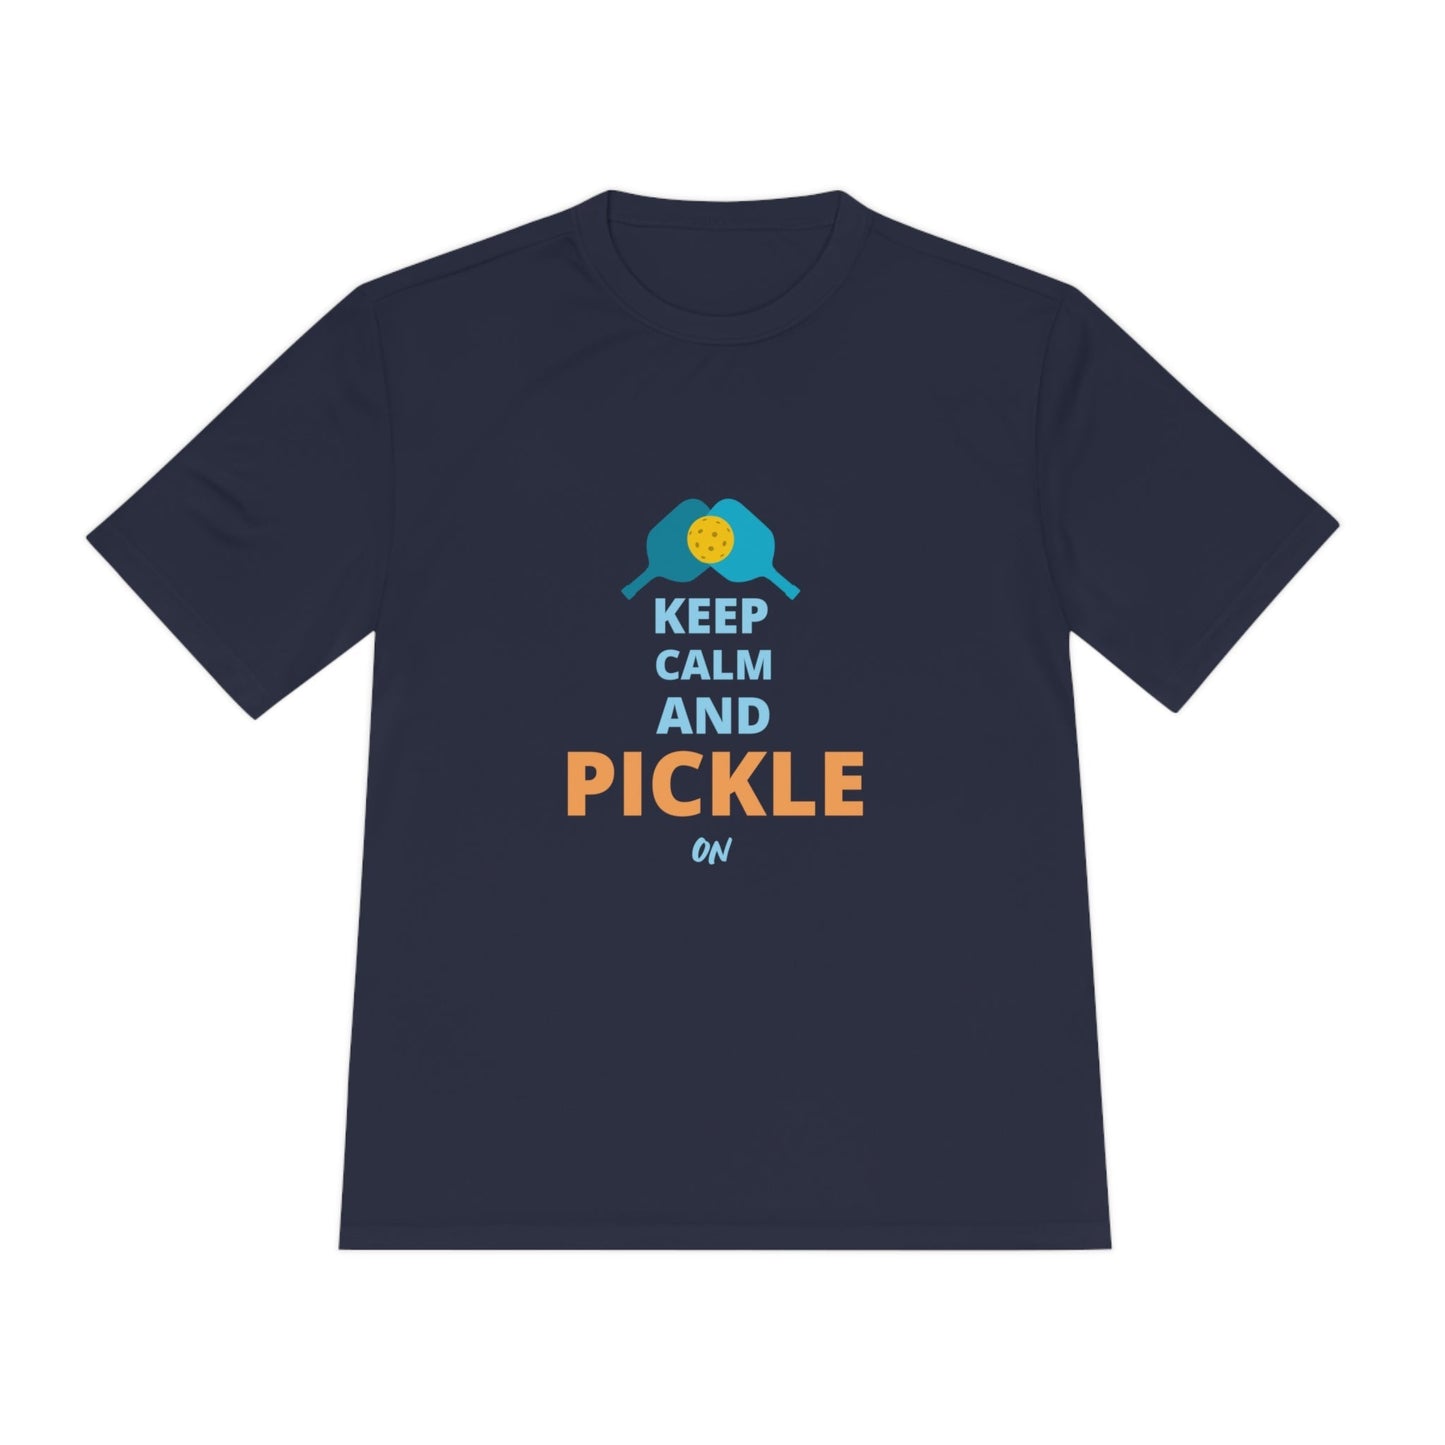 'Keep Calm and Pickle On' Dri Fit T-Shirt